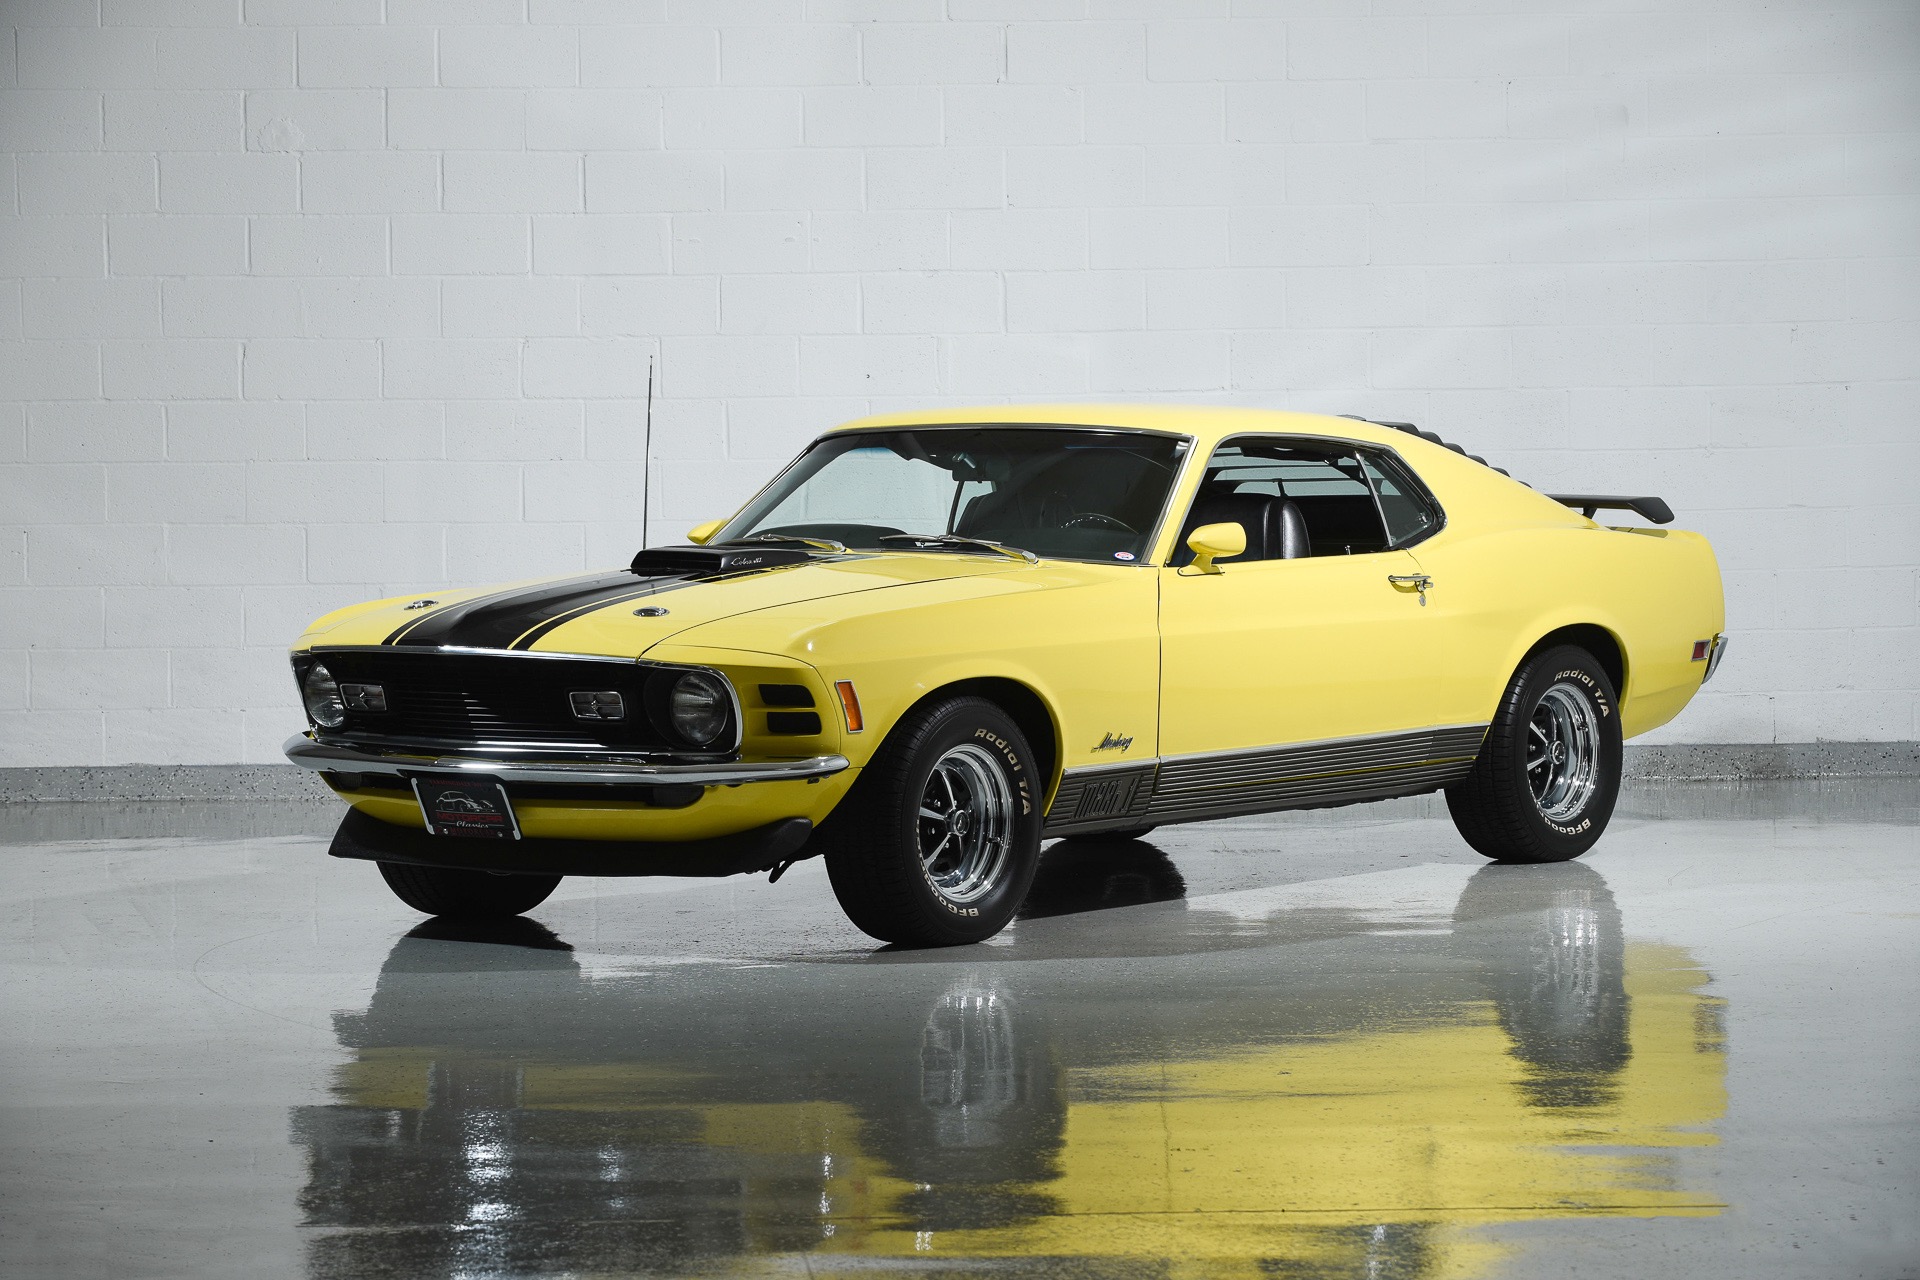 Used 1970 Ford Mustang Mach 1 For Sale ($69,900) | Motorcar Classics ...